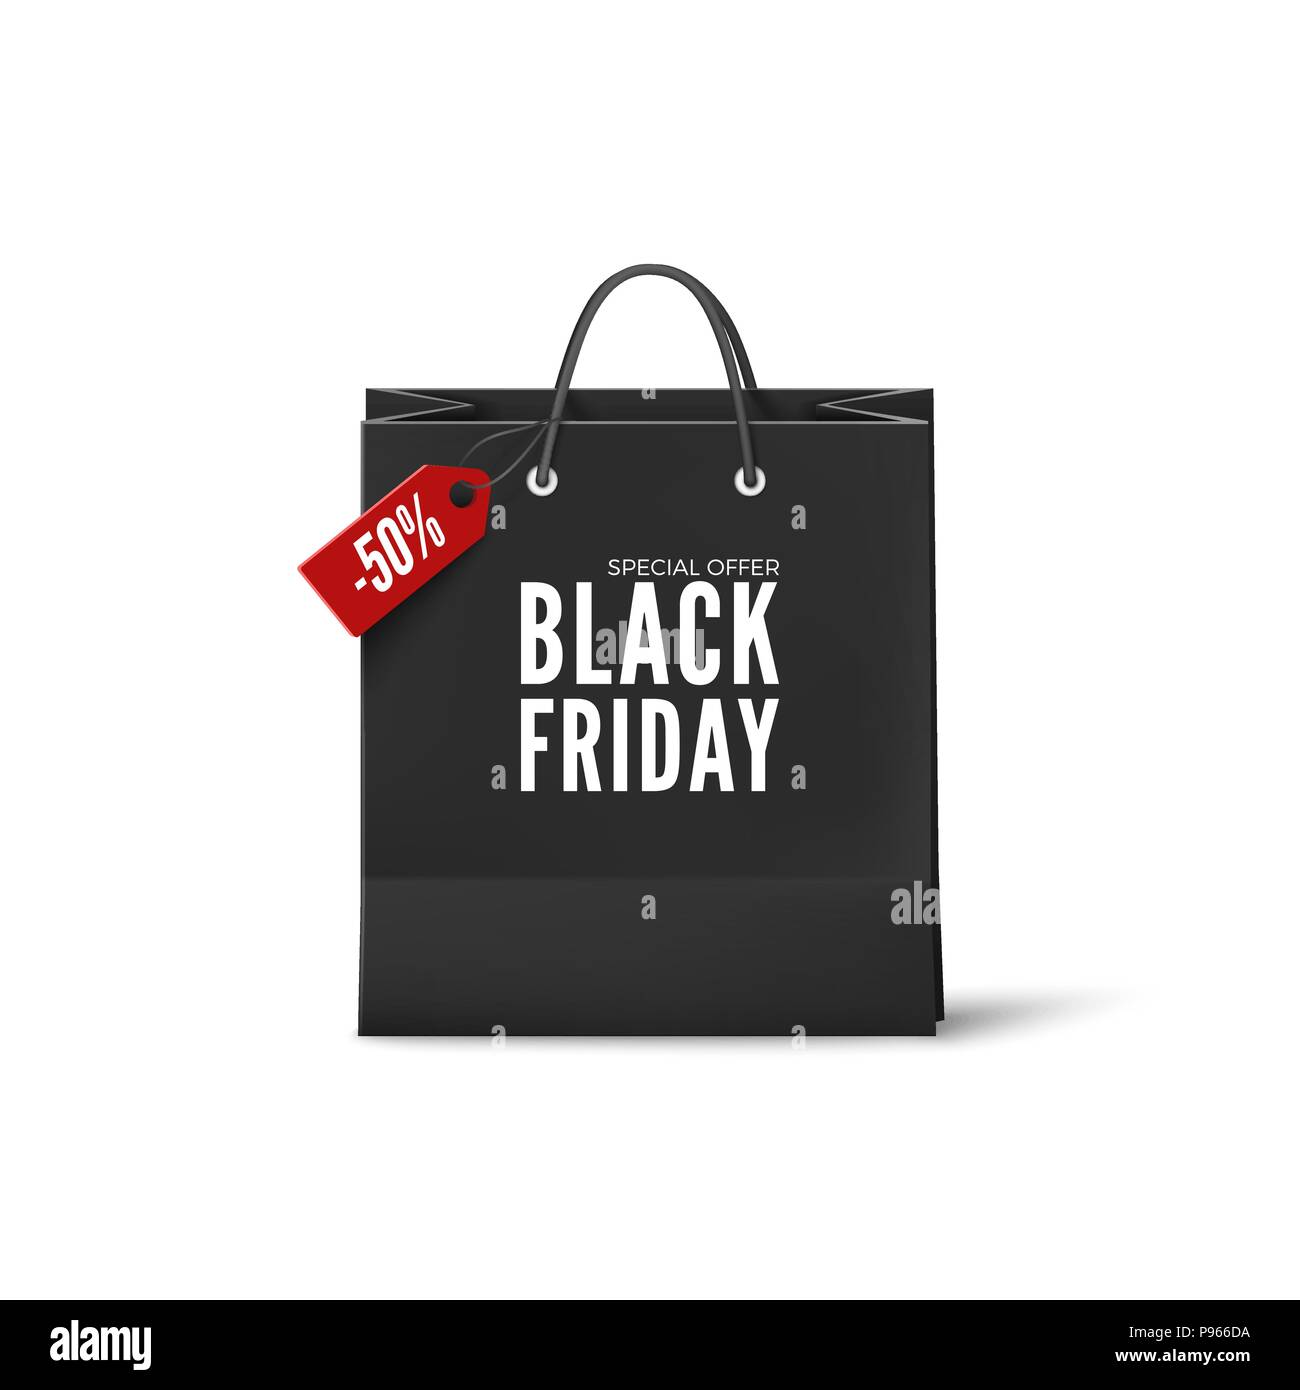 Black Friday Poster. Black paper bag with discount tag. Black friday banner template. Vector illustration isolated on white background Stock Vector